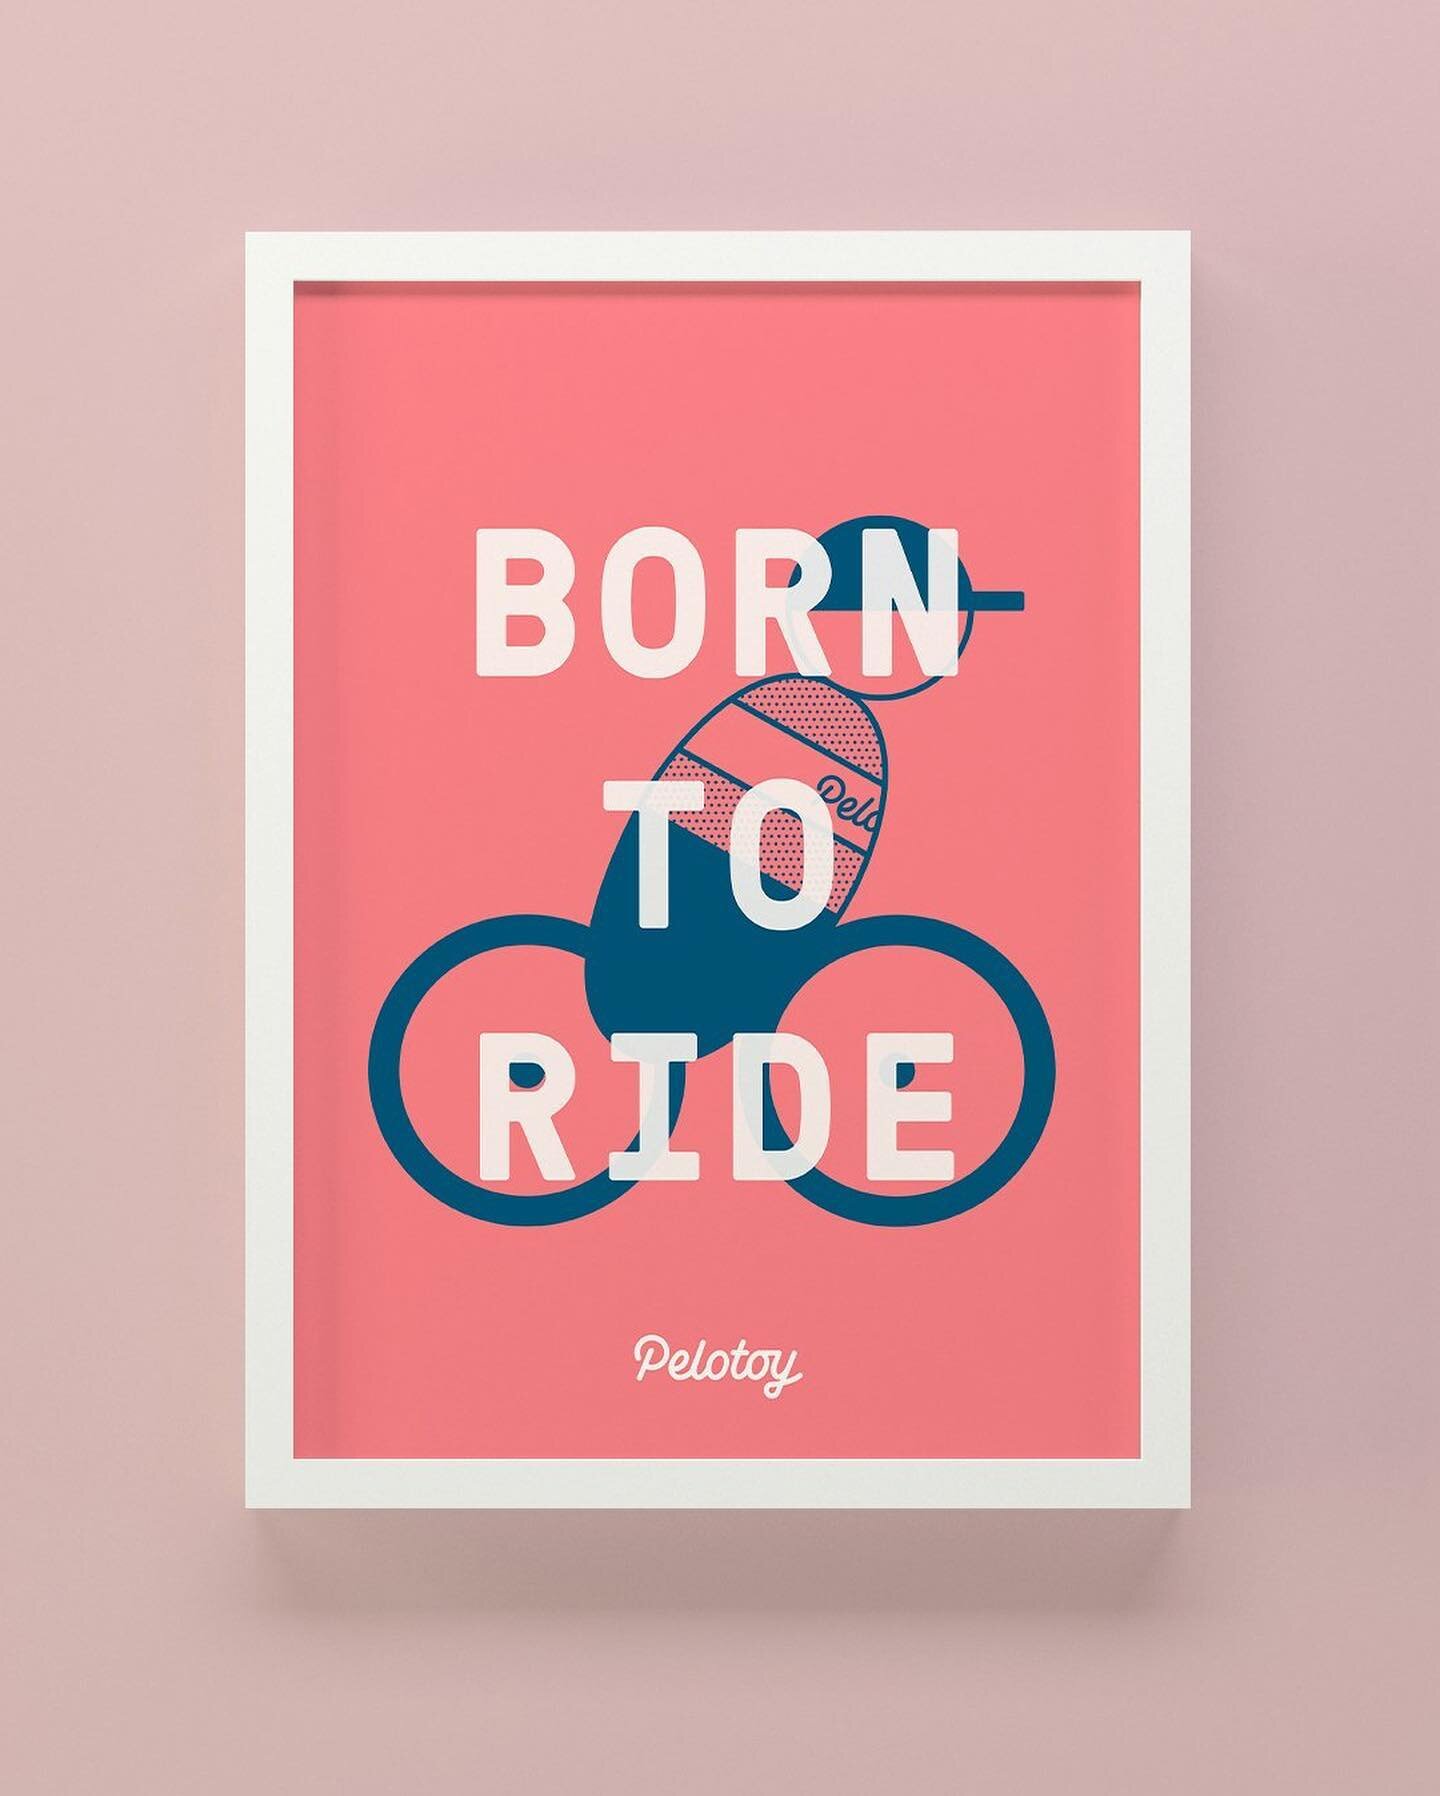 Add a splash of colour to your wall with our Pelotoy posters. Available NOW in our online store - link in bio

#jointheride #pelotoy #art #cycling